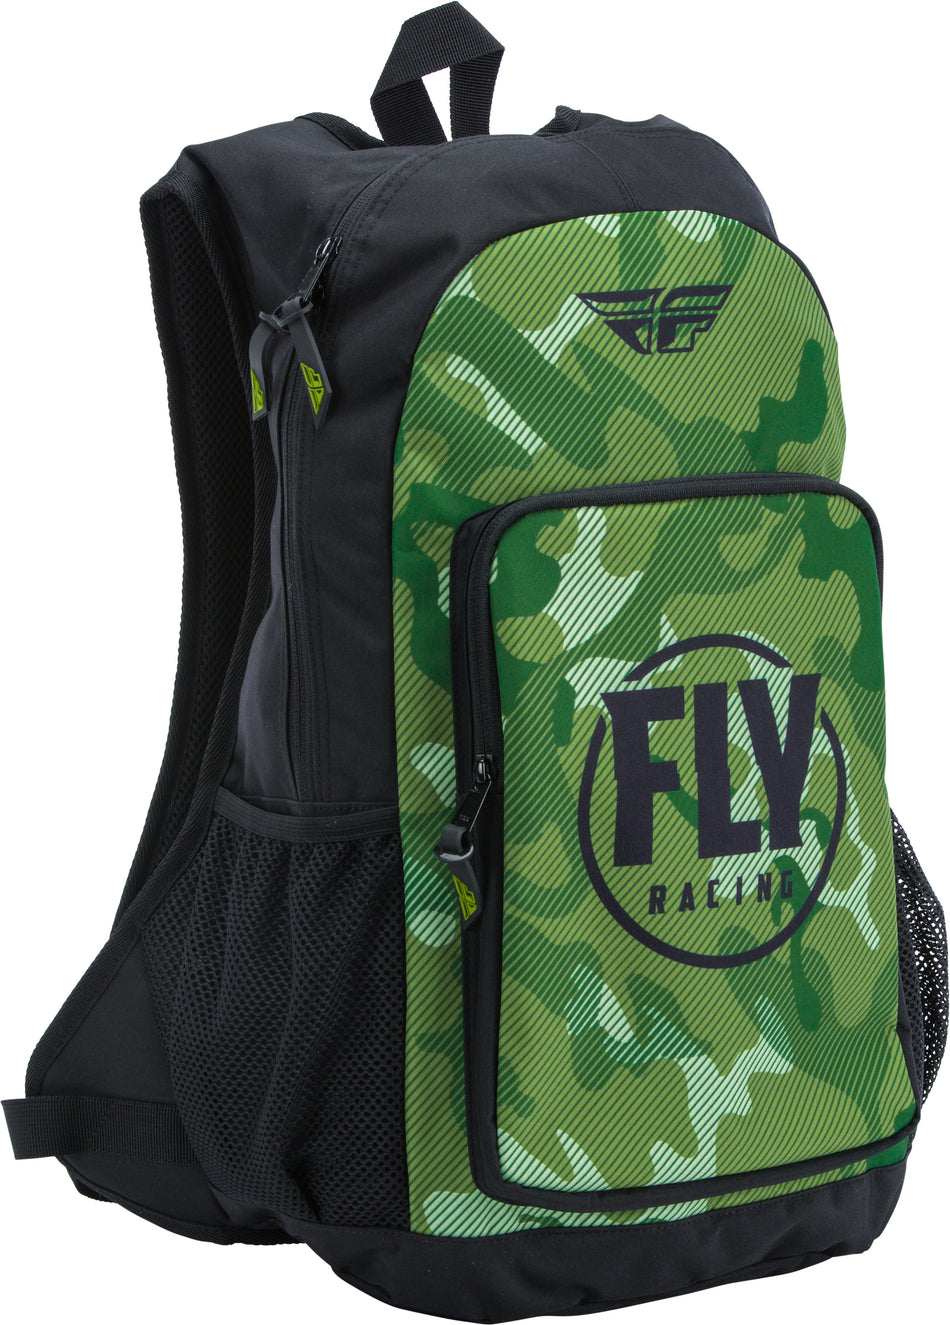 FLY RACING Jump Pack Backpack Green/Black Camo 28-5207